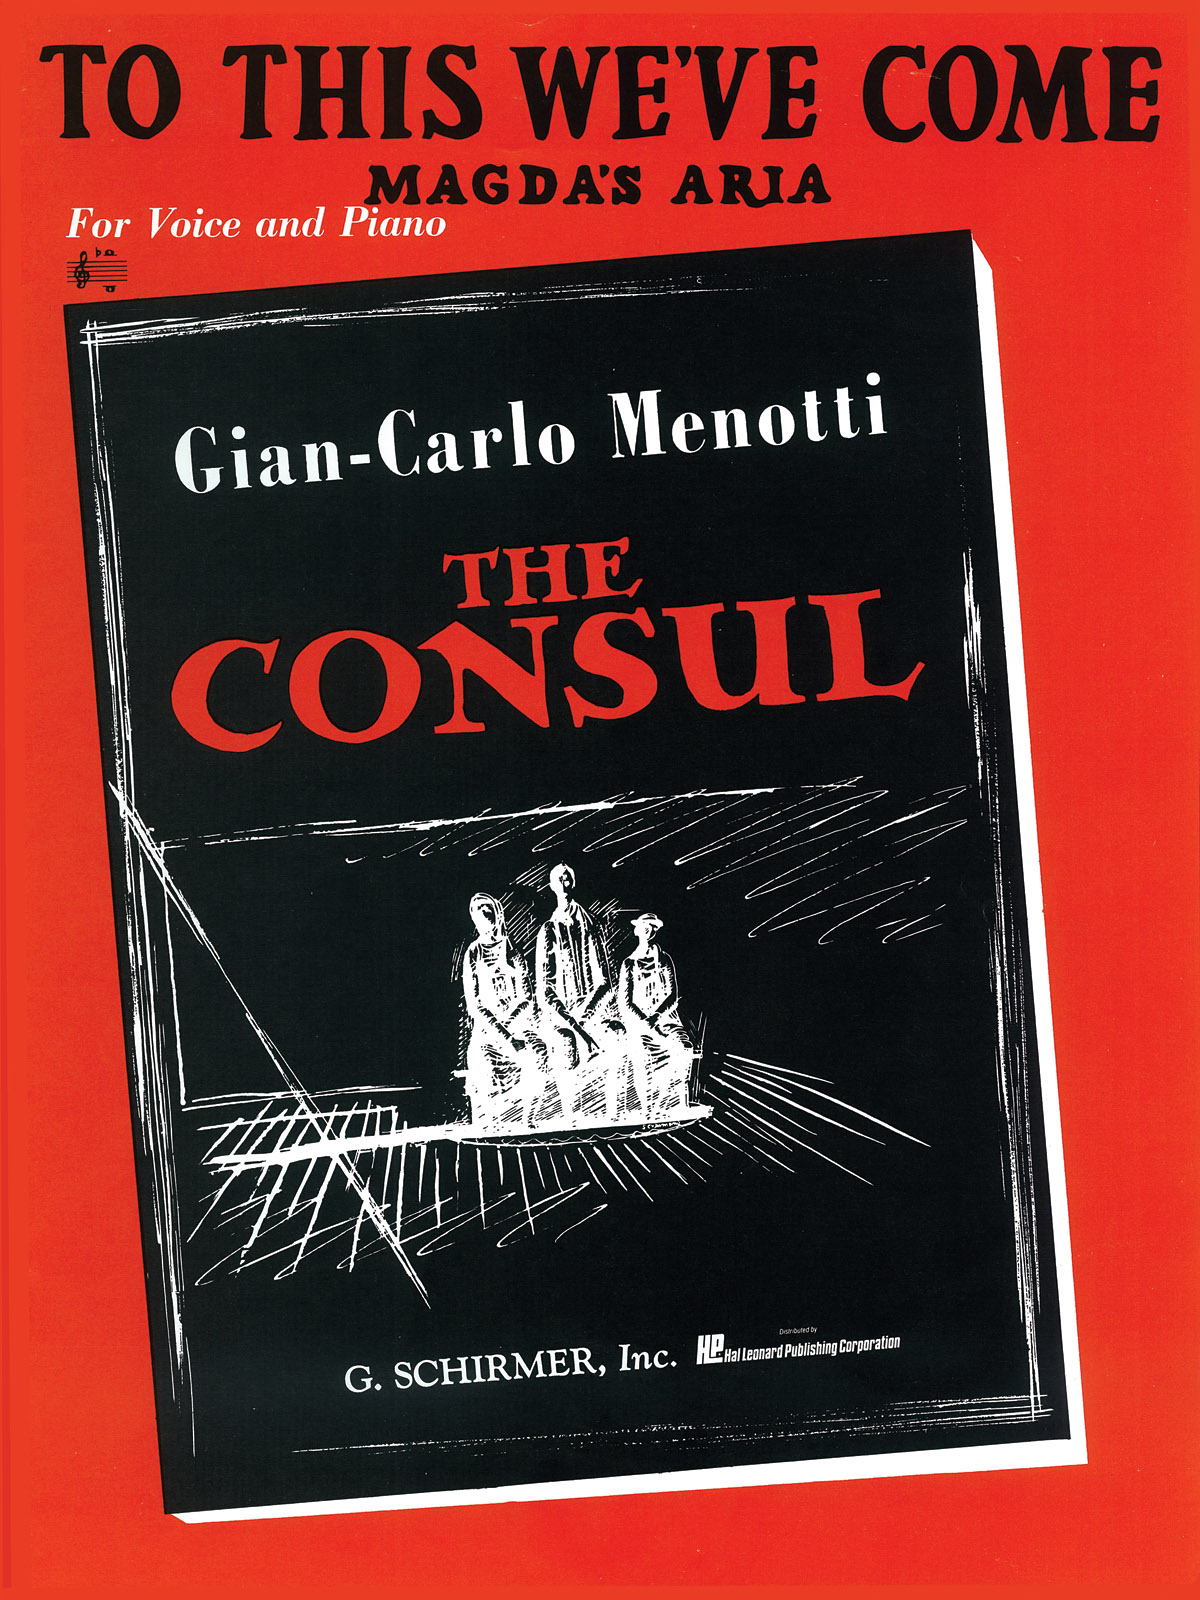 Gian-Carlo Menotti: To This We've Come